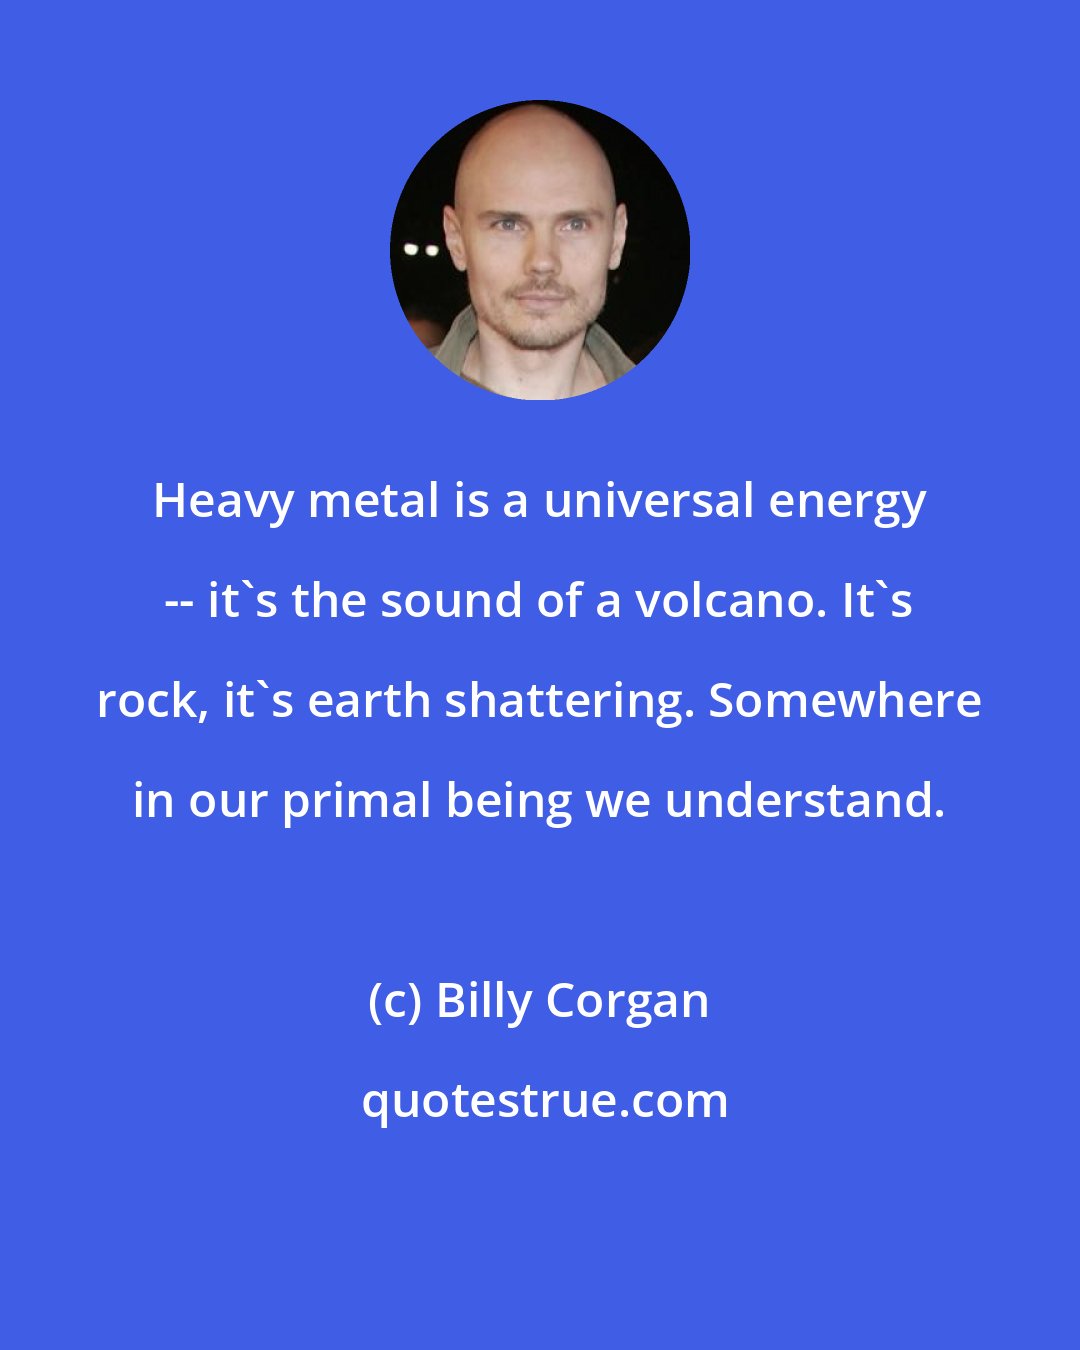 Billy Corgan: Heavy metal is a universal energy -- it's the sound of a volcano. It's rock, it's earth shattering. Somewhere in our primal being we understand.